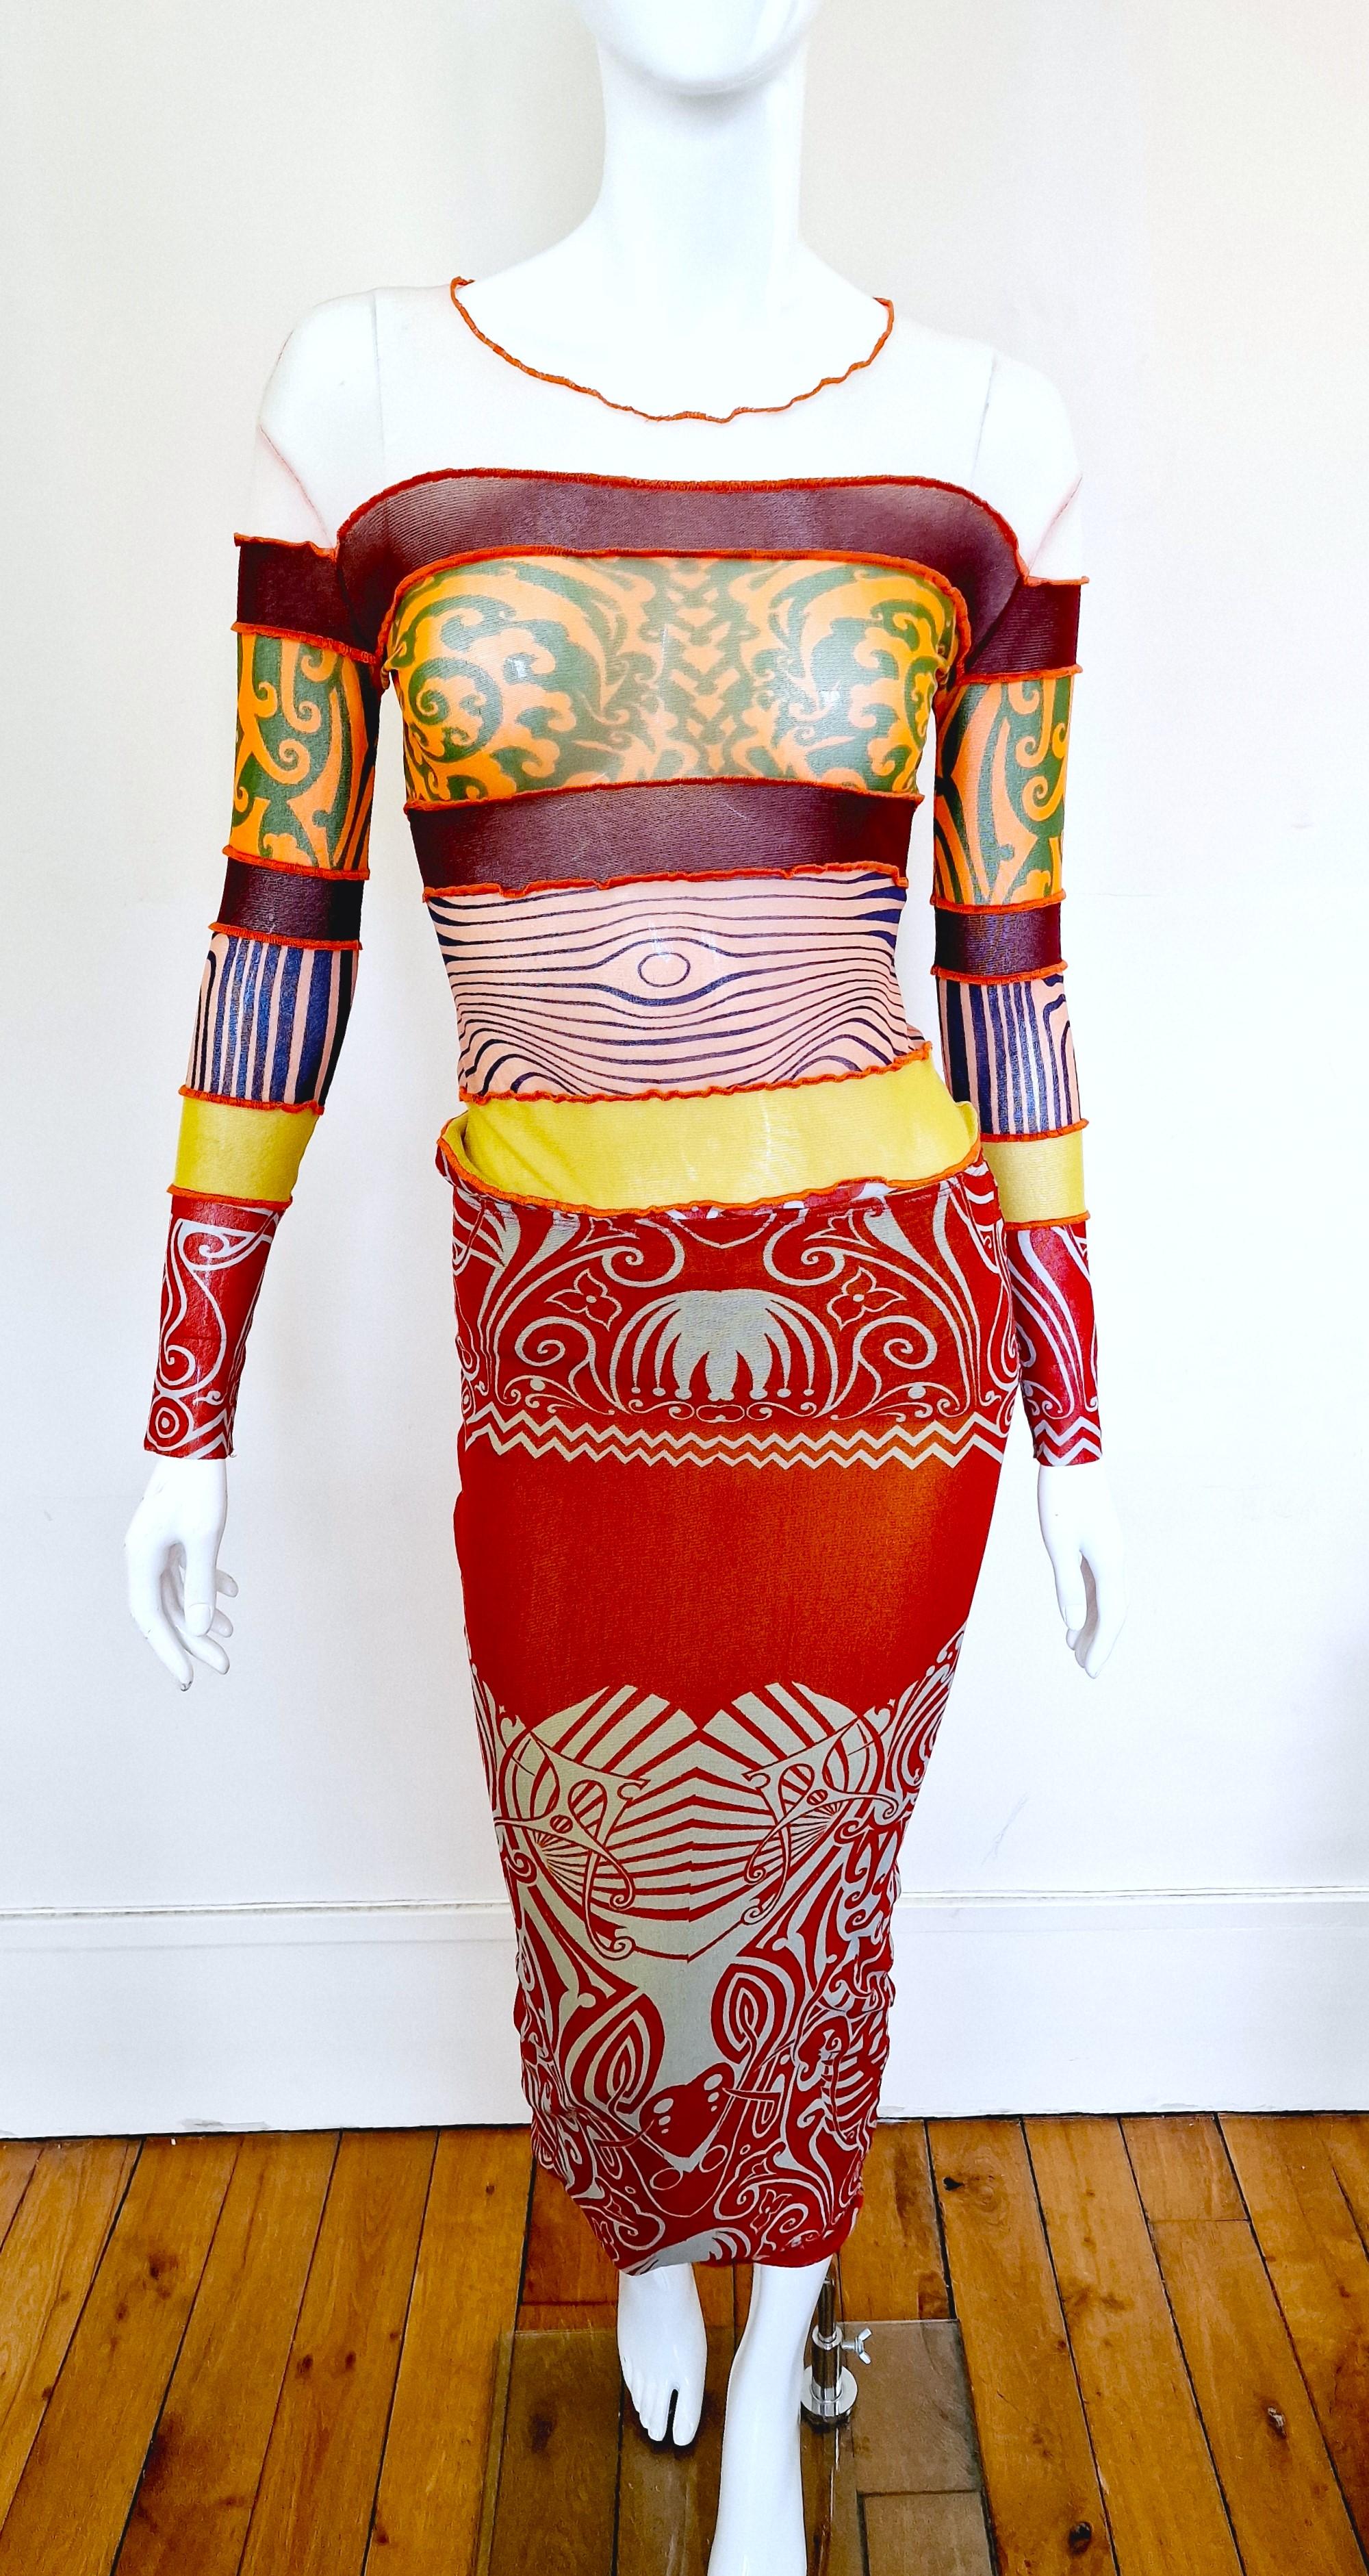 Iconic Optical Illusion Top + Skirt SET by Jean Paul Gaultier!
Worn by supermodel HELENA CHRISTENSEN at the JEAN PAUL GAULTIER Spring/Summer 1996 runway show.

JEAN PAUL GAULTIER Maille vintage iconic and rare Cyberbaba tattoo and body map optical